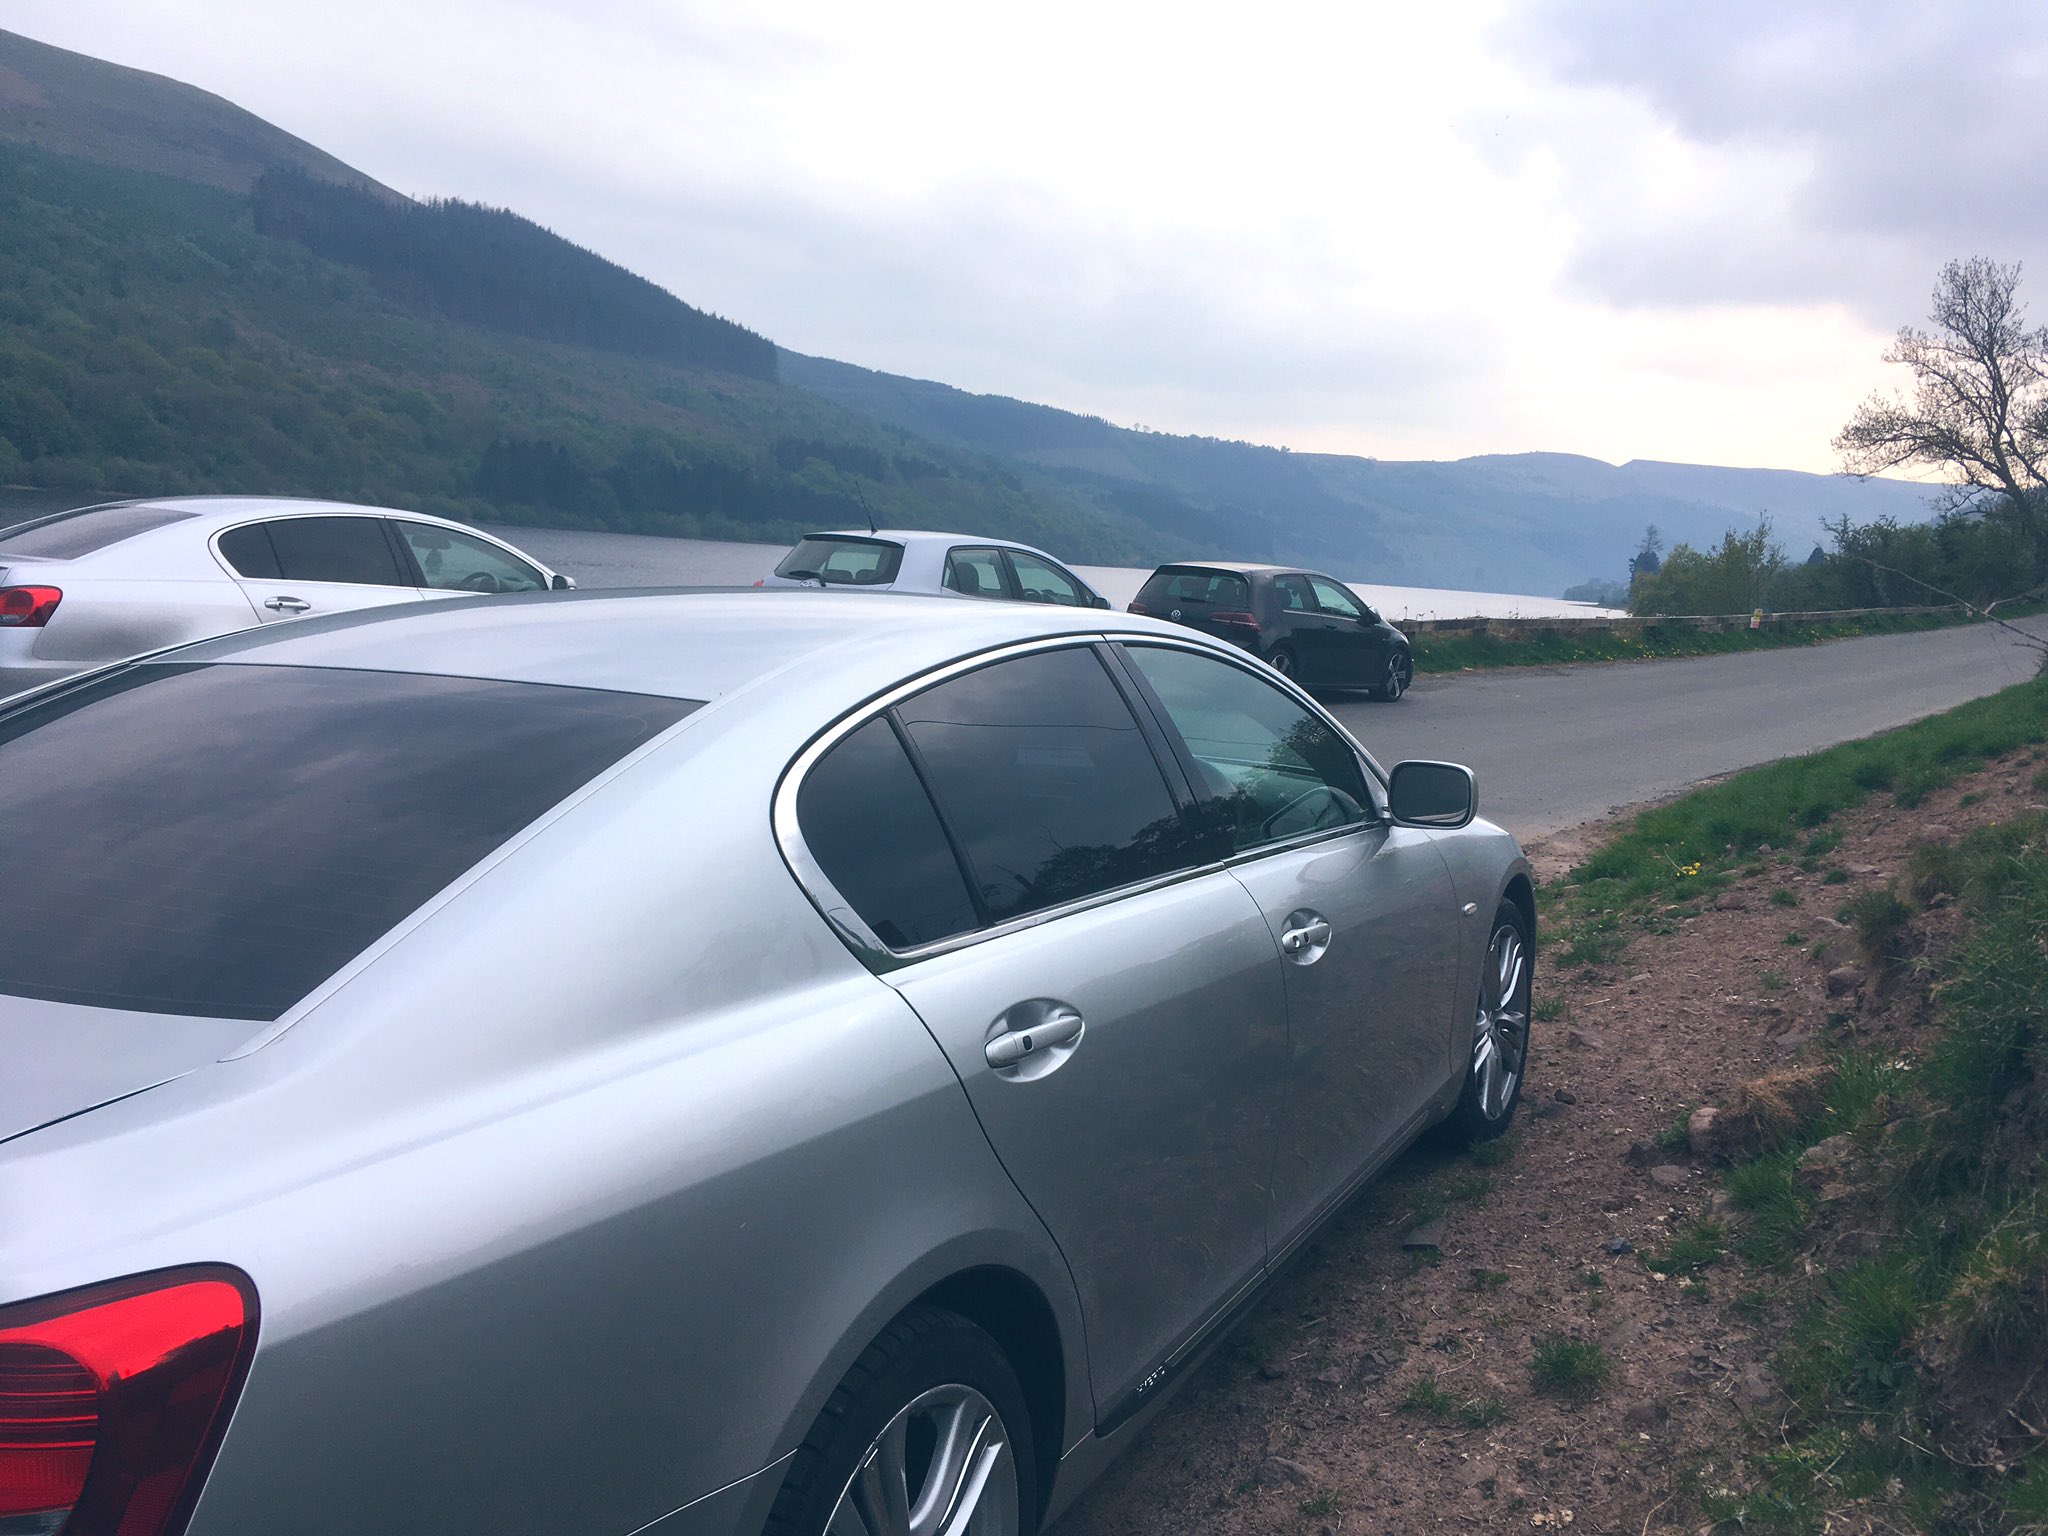 NEWS | Police in Brecon stop car from Hereford in the Brecon Beacons